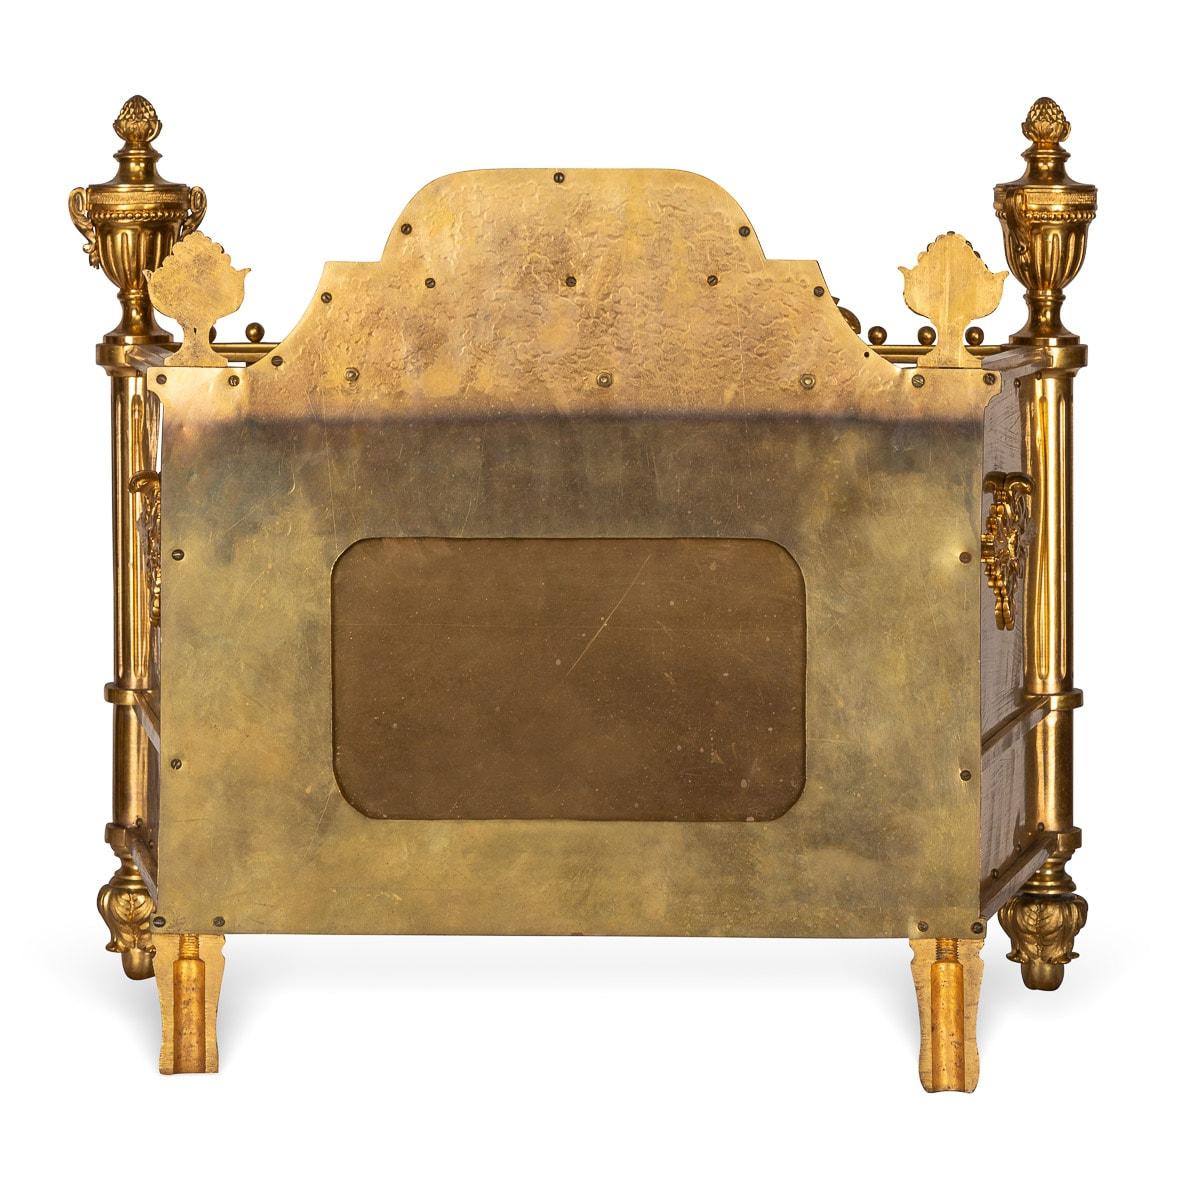 20th Century French Ormolu Fireplace Wood Burner, circa 1900 In Good Condition For Sale In Royal Tunbridge Wells, Kent